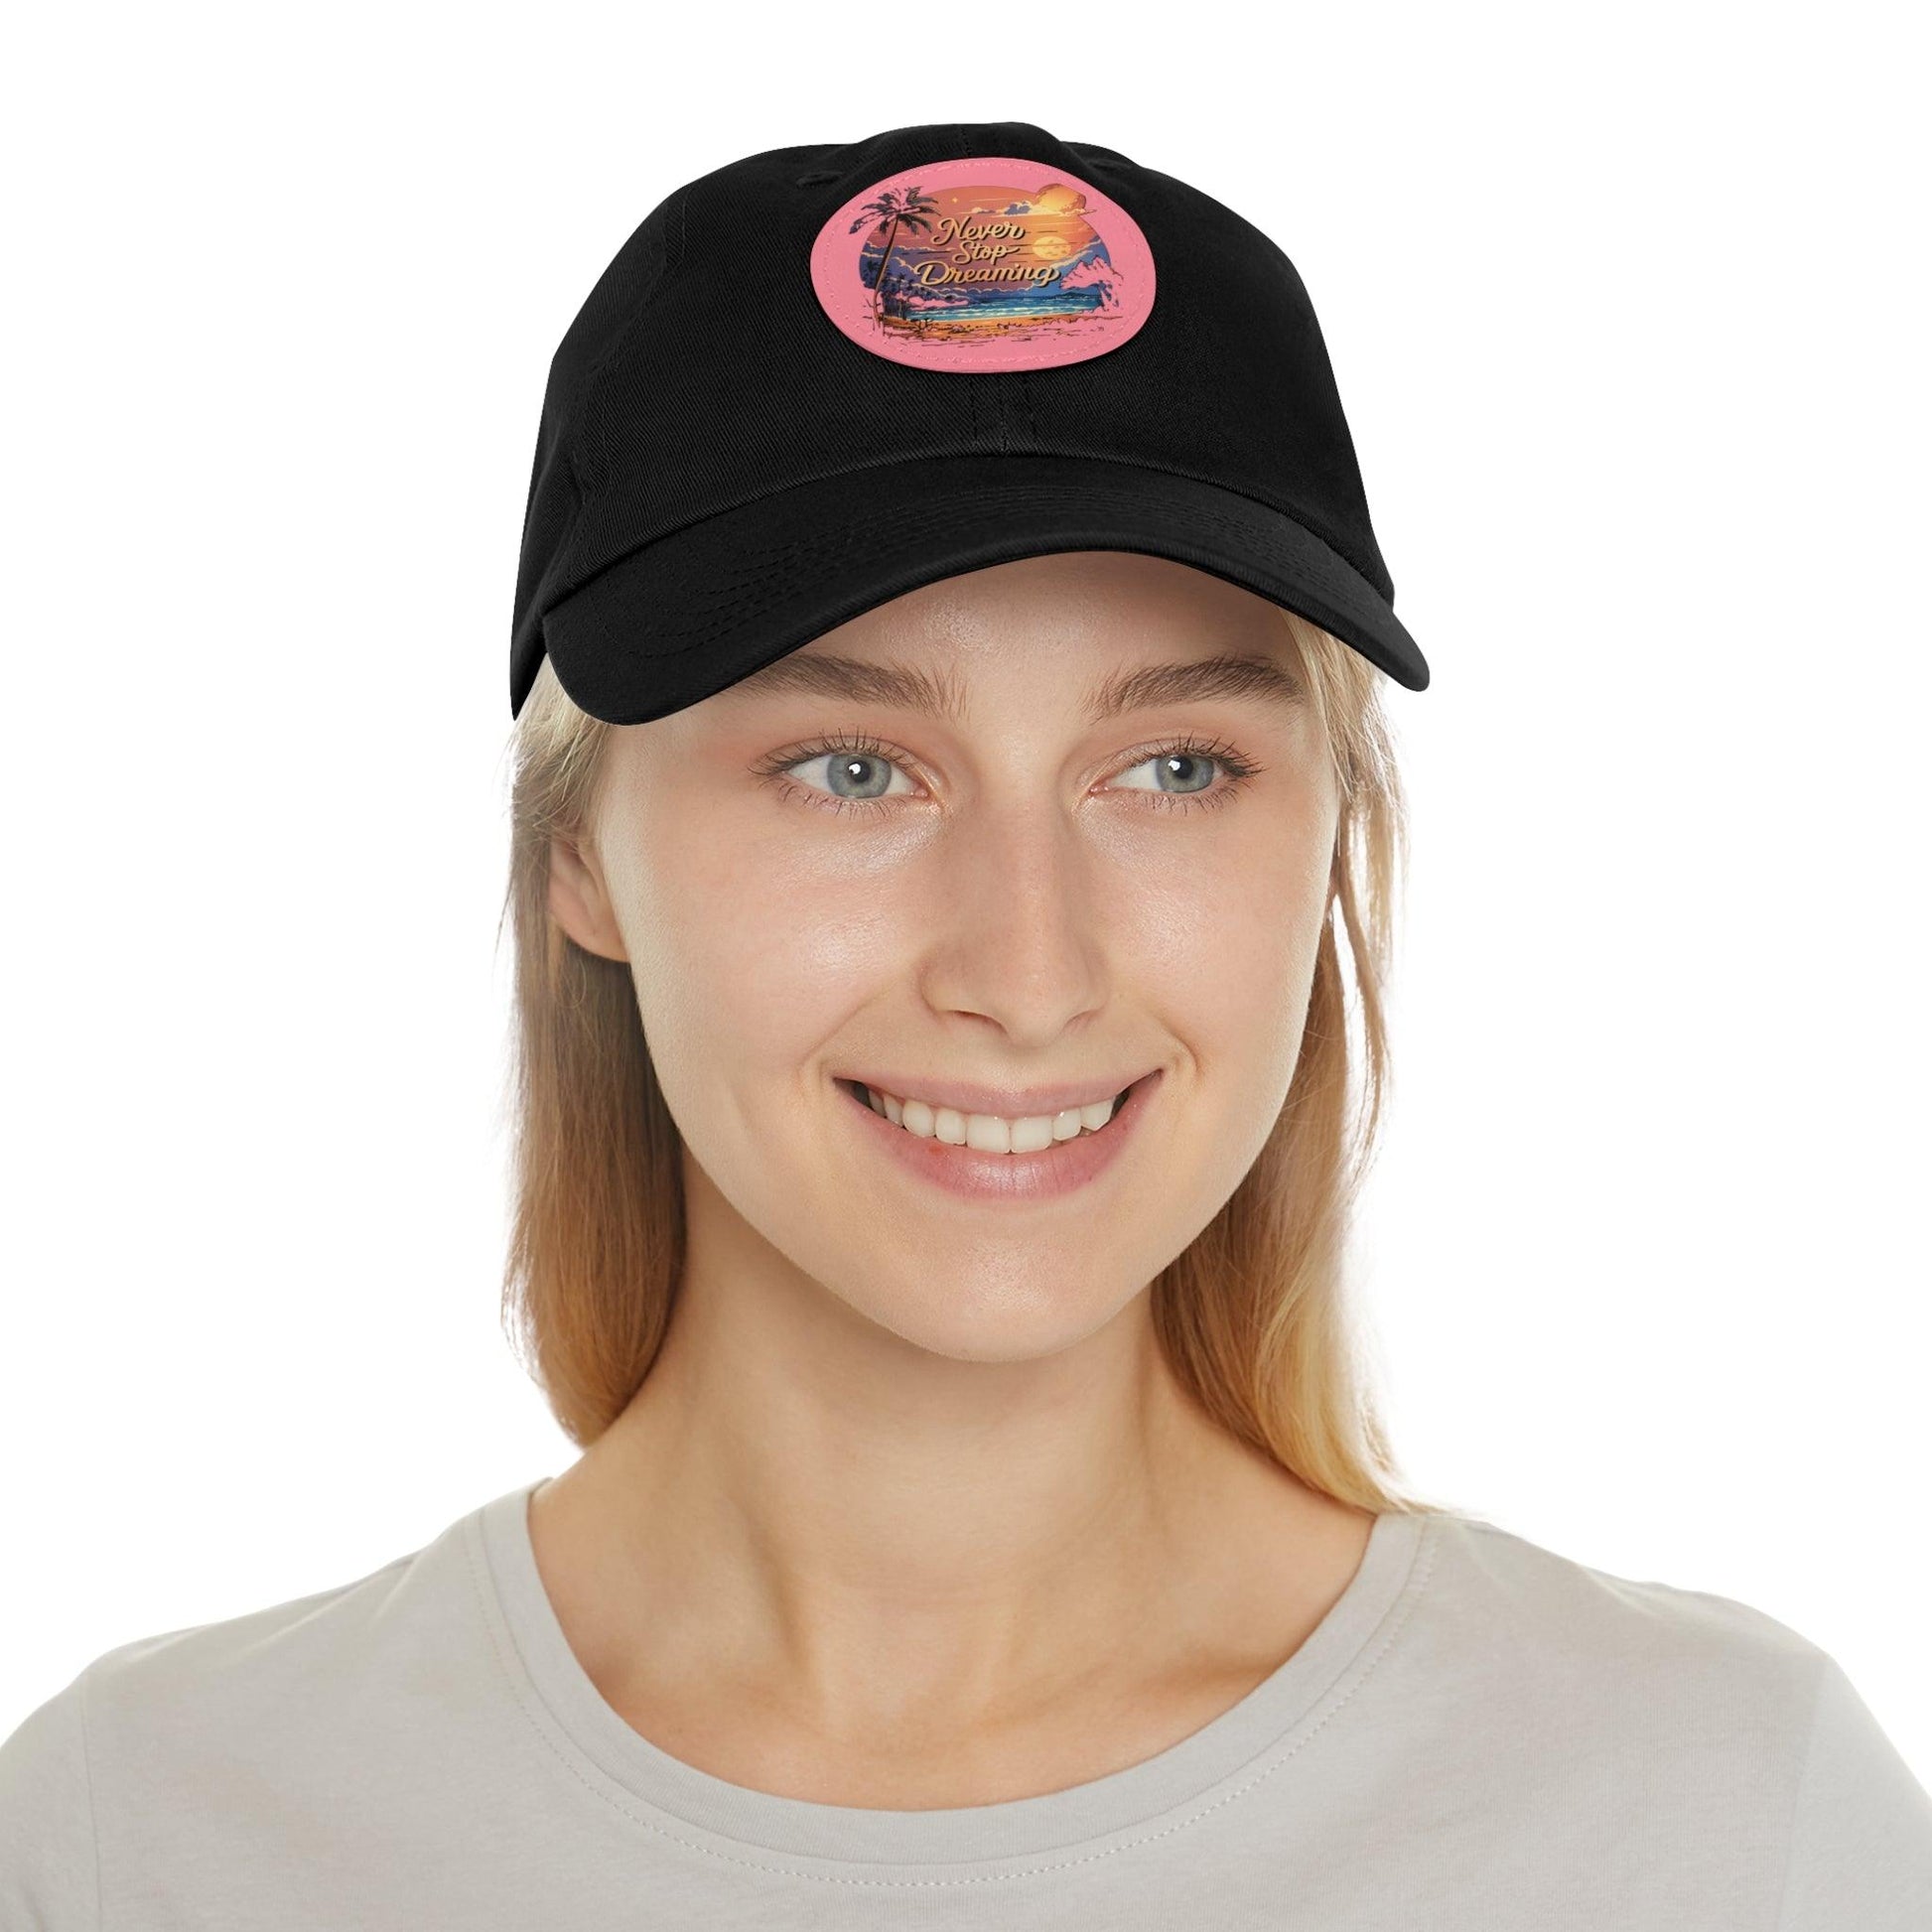 Never Stop Dreamin Cap, Beach Hair Day Hat, Inspirational Beach Inspired Cap - Coastal Collections